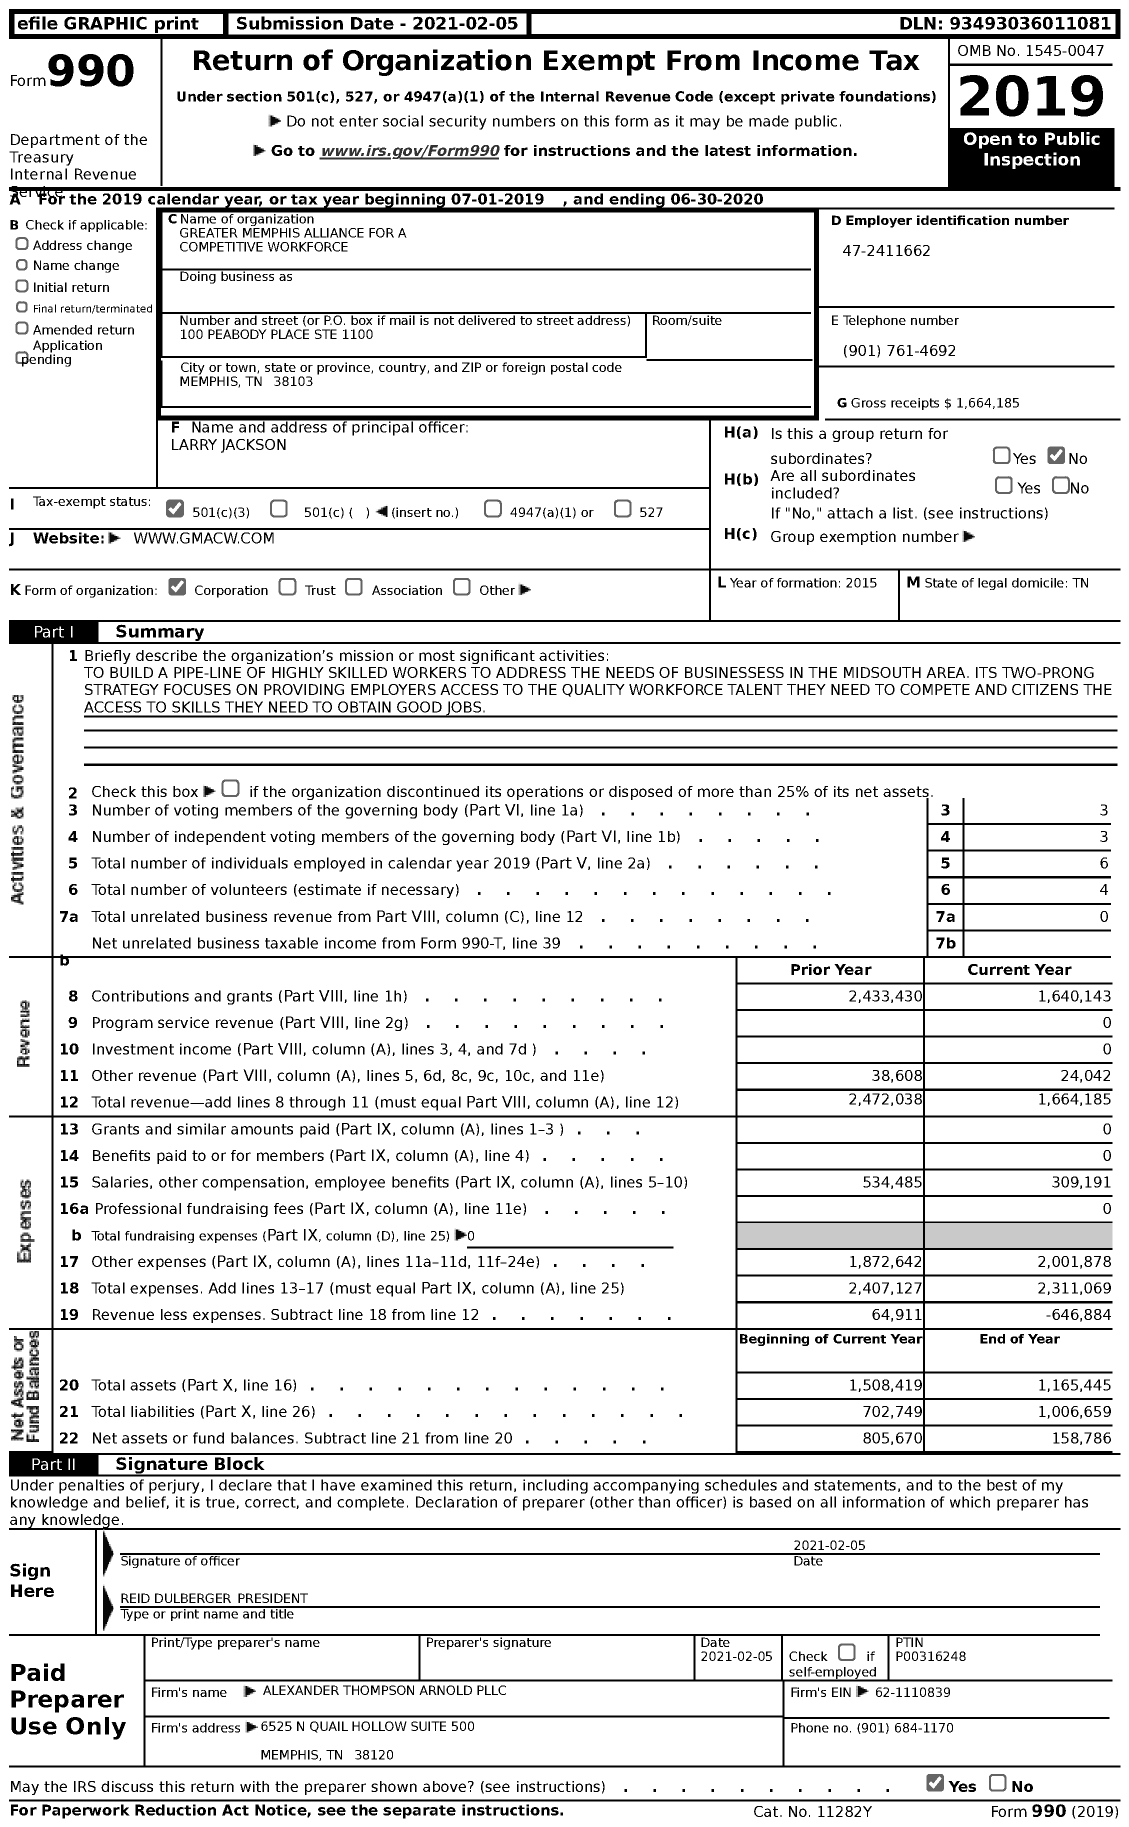 Image of first page of 2019 Form 990 for Greater Memphis Alliance for A Competitive Workforce